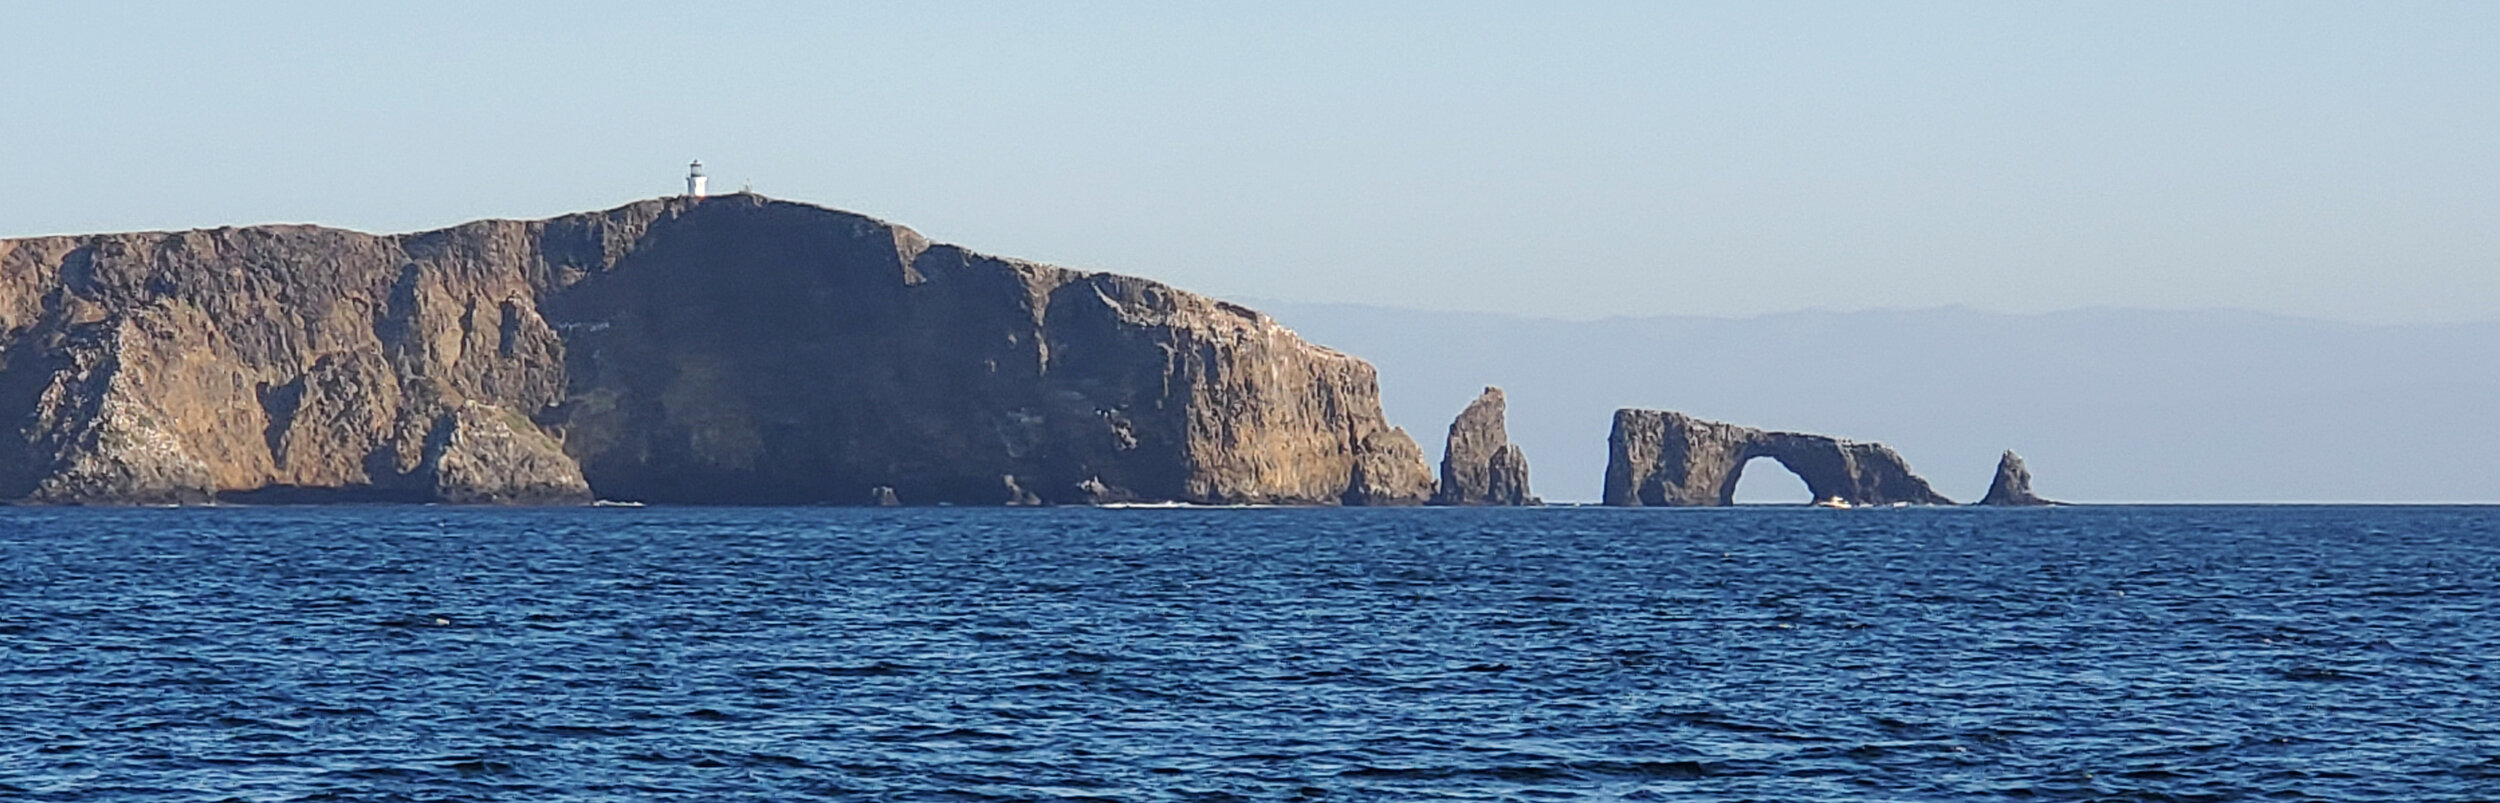 Catalina Is Arch.jpg